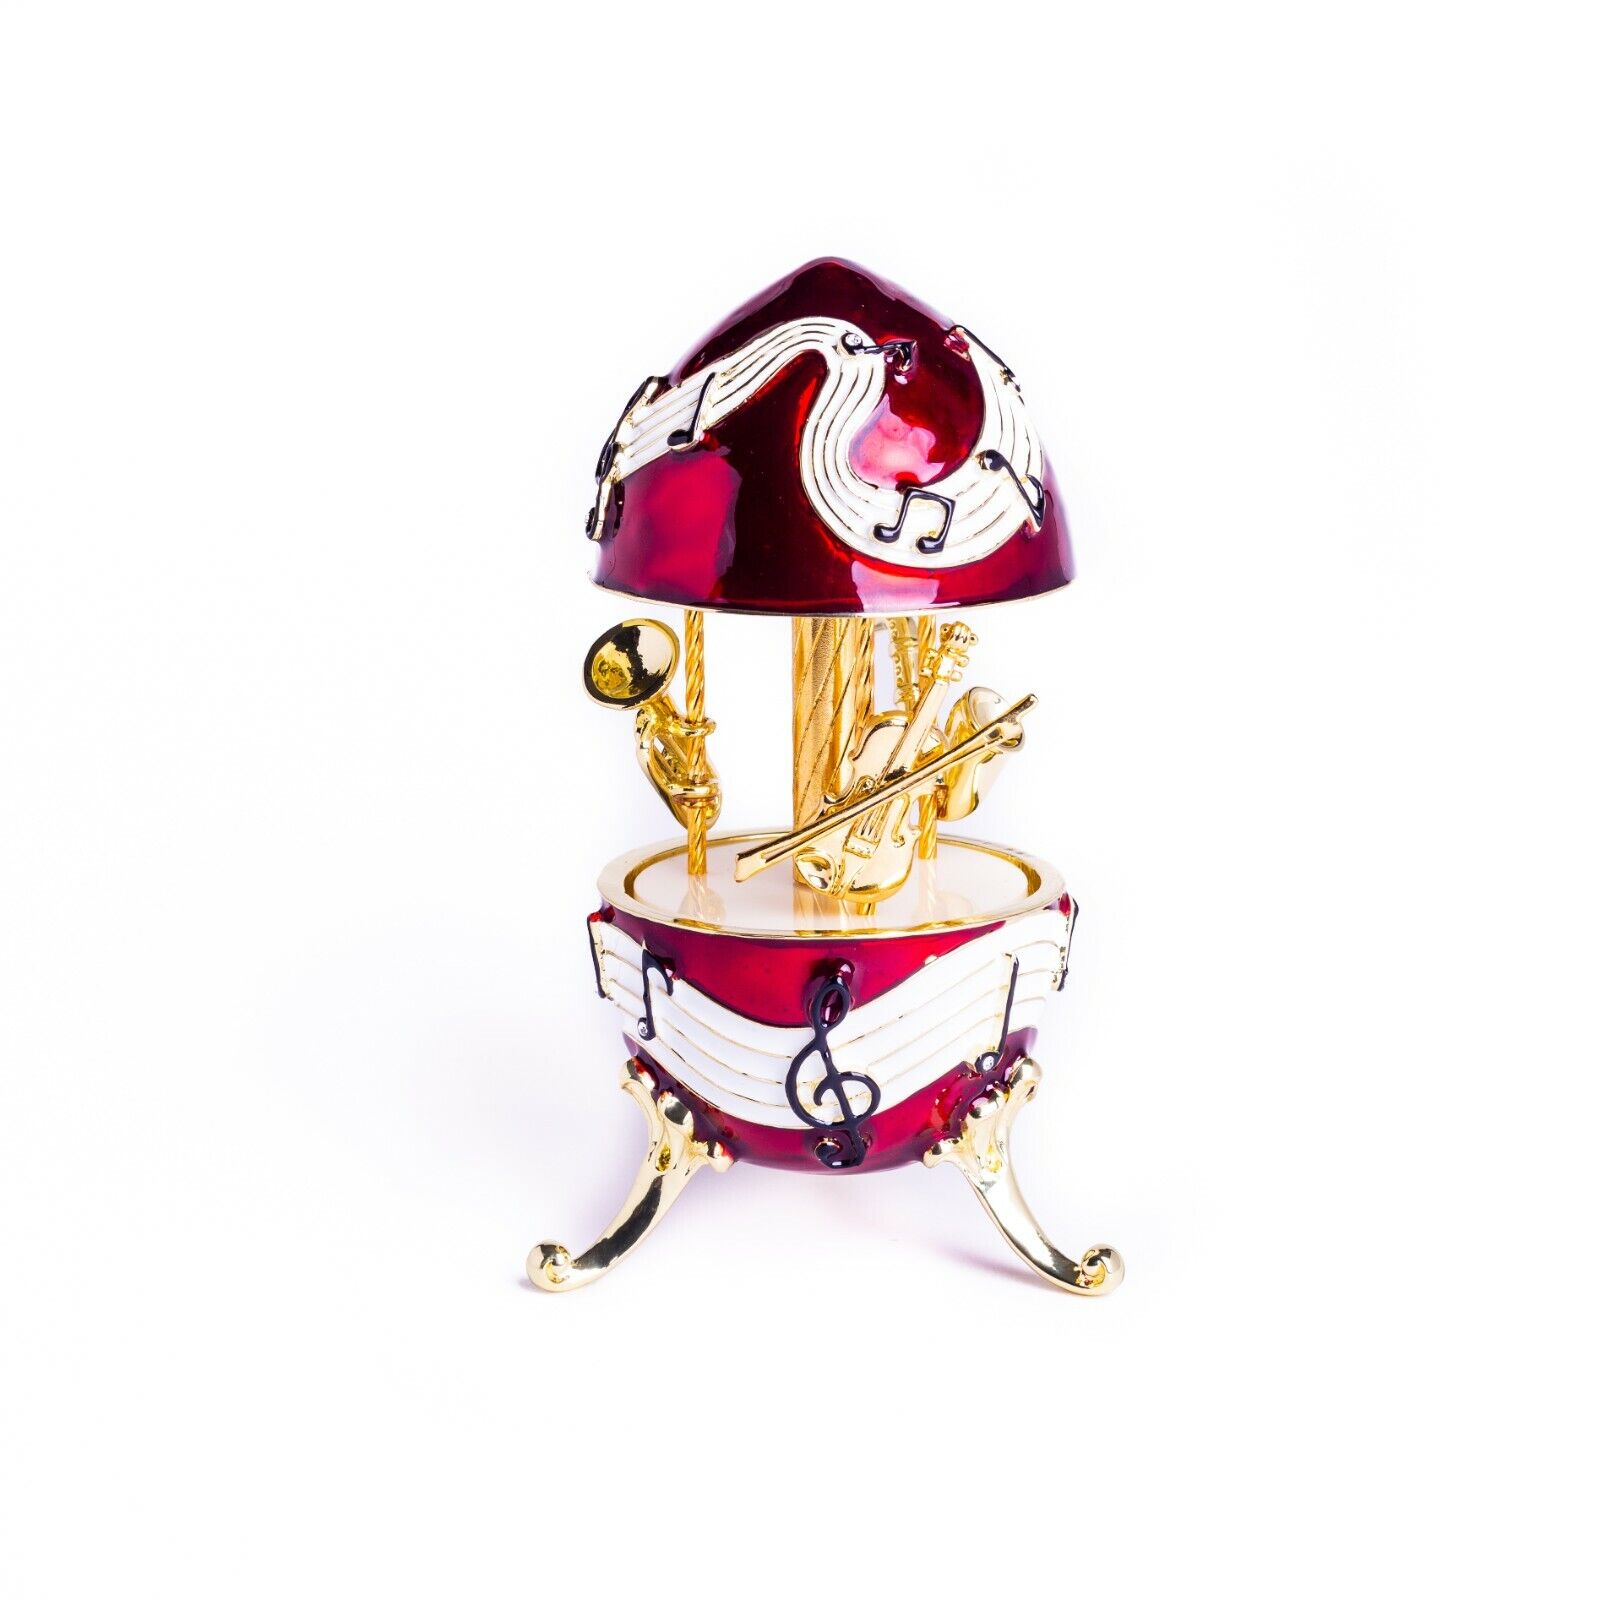 Easter Egg Musical Instruments Carousel  by Keren Kopal music box with crystal